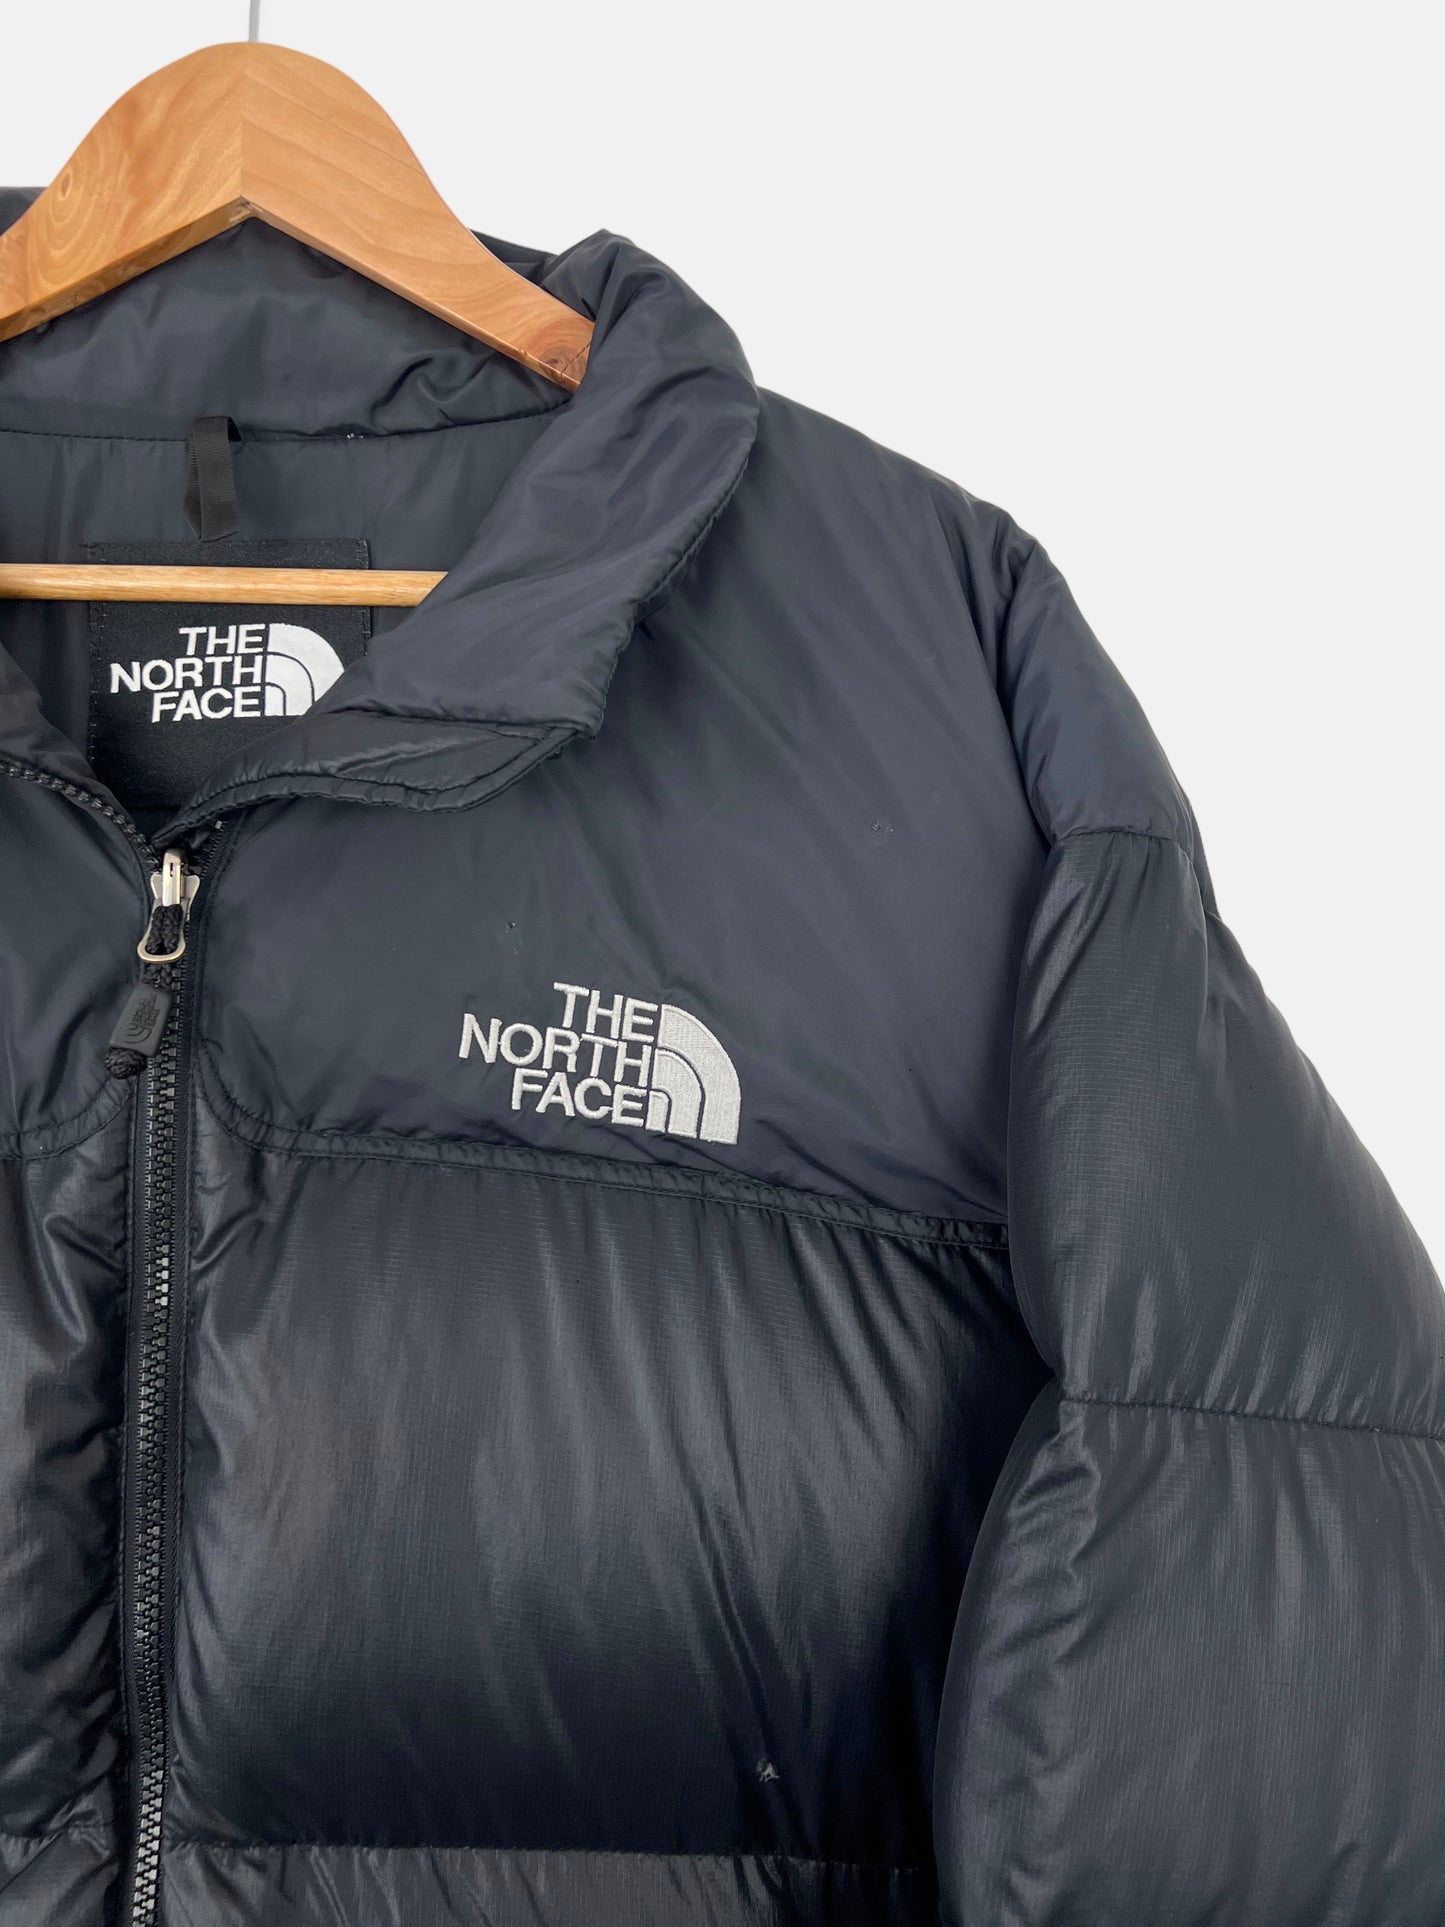 90's The North Face Nuptse 700 Embroidered Vintage Puffer Jacket Size XL-2XL